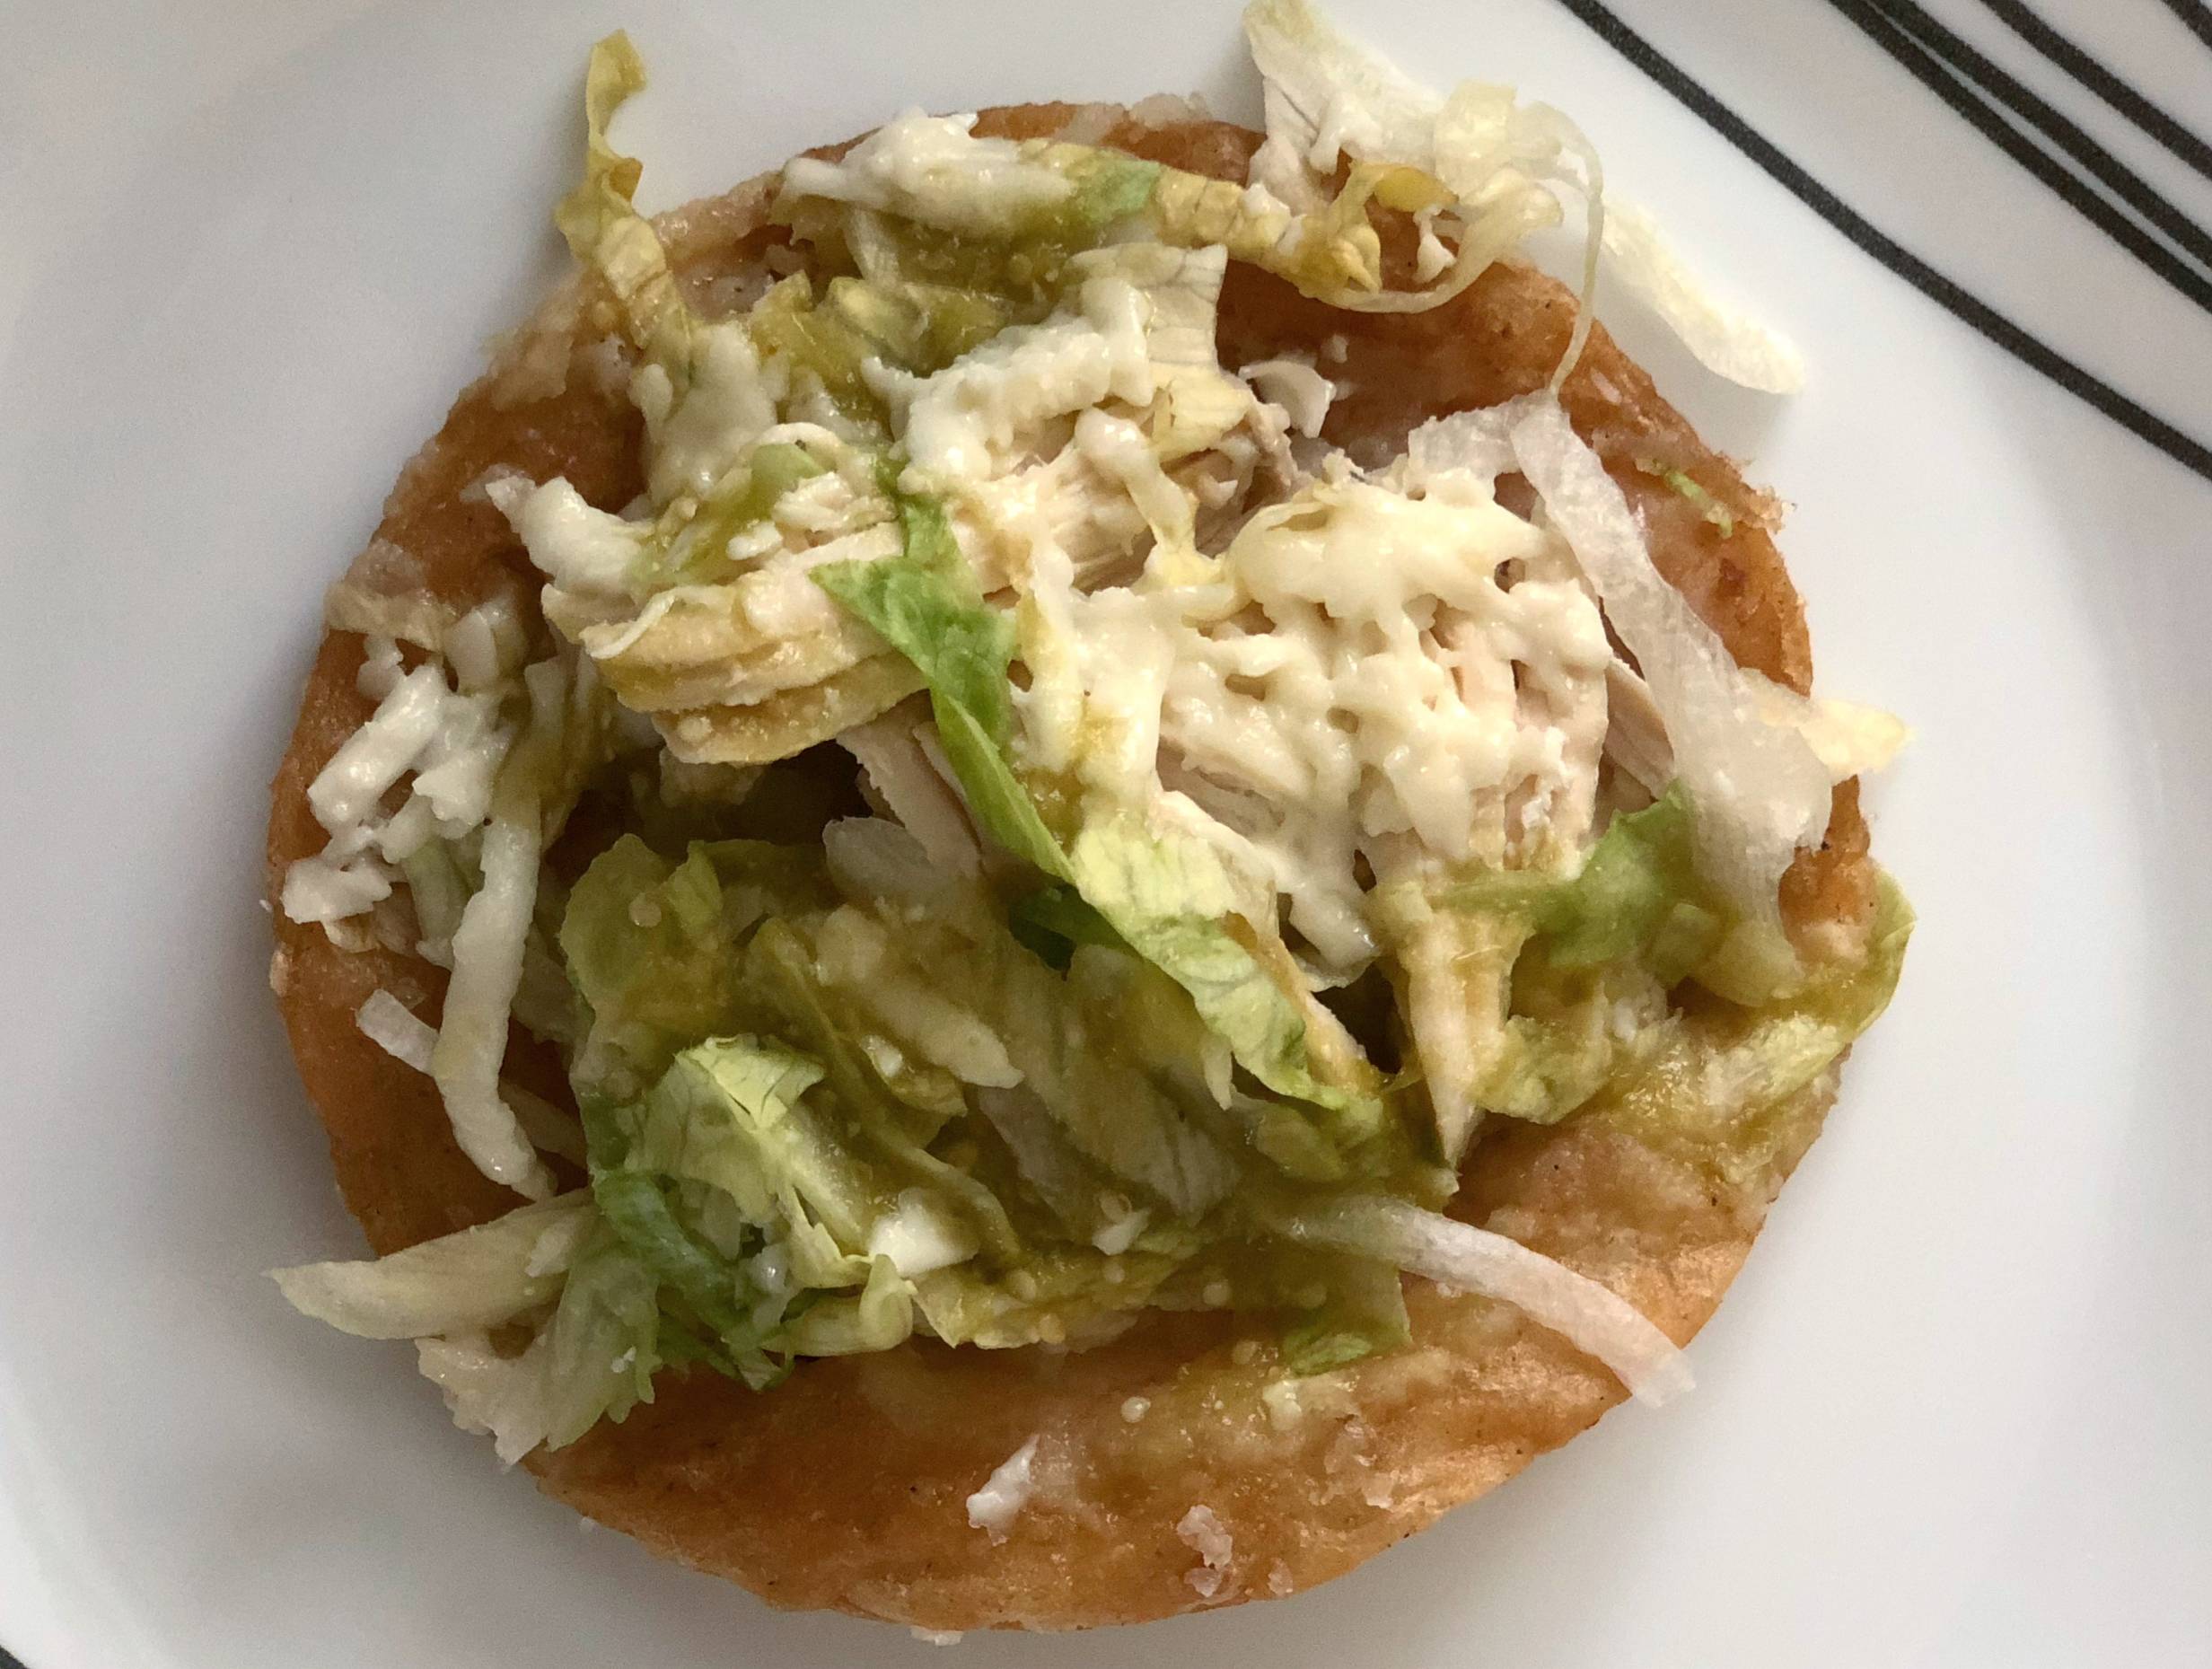 A single chalupa on a white plate. Photo by Alyssa Buckley.